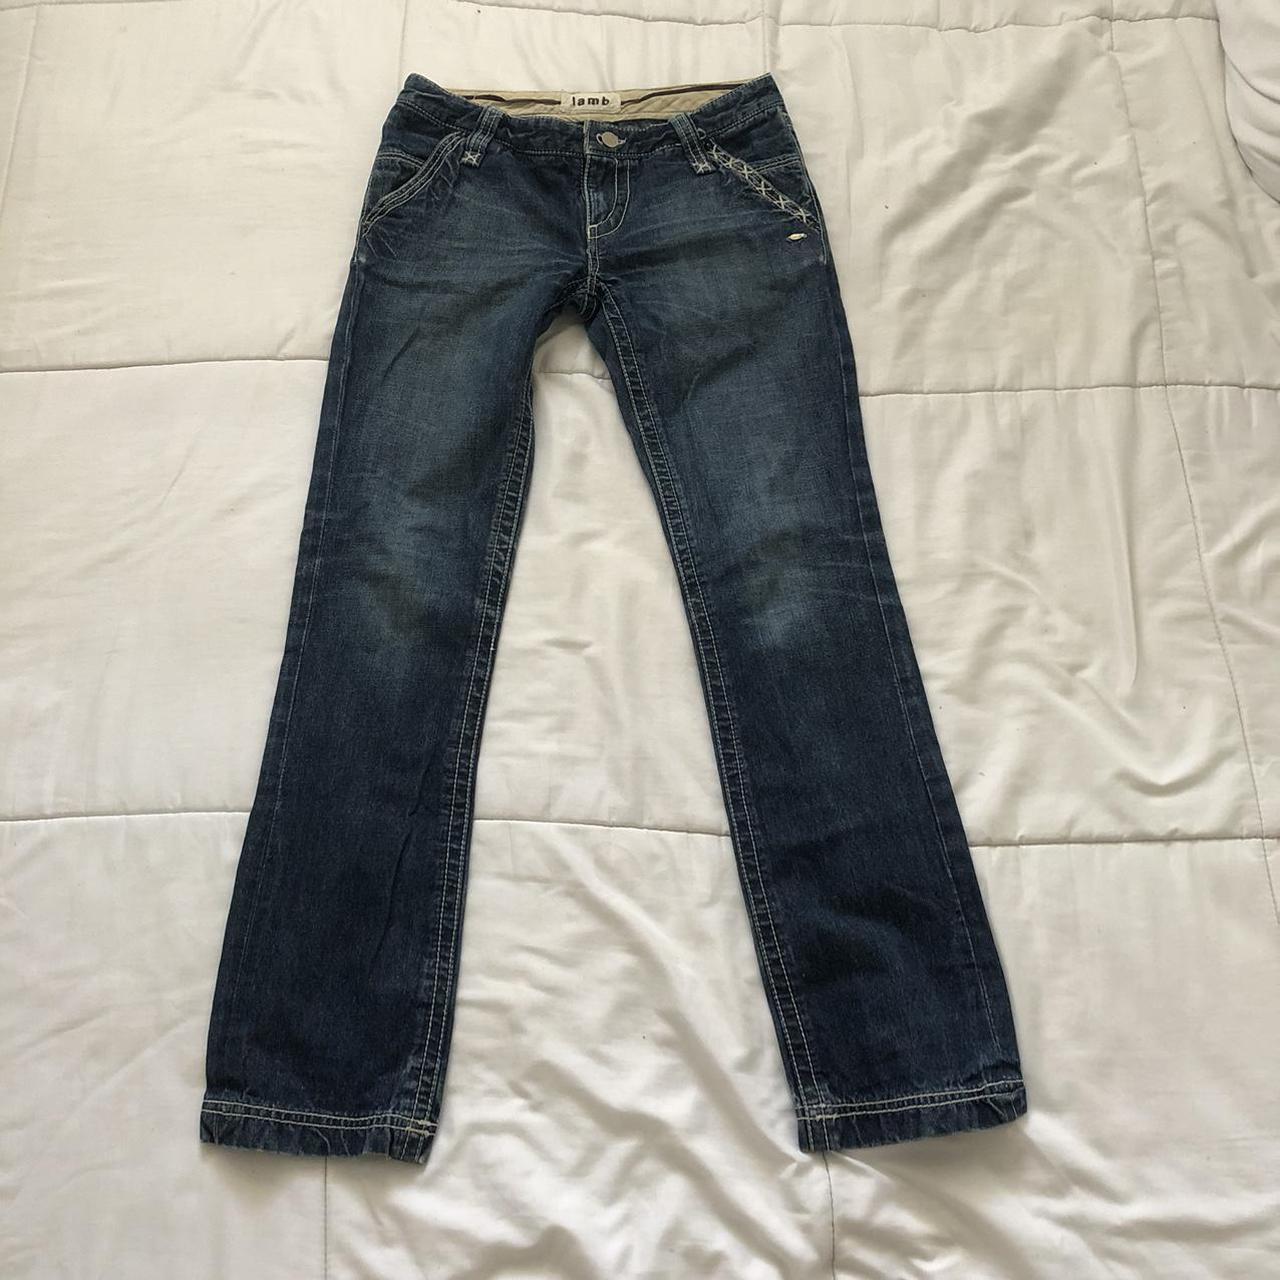 Japanese low rise jeans 🥟 In amazing... - Depop